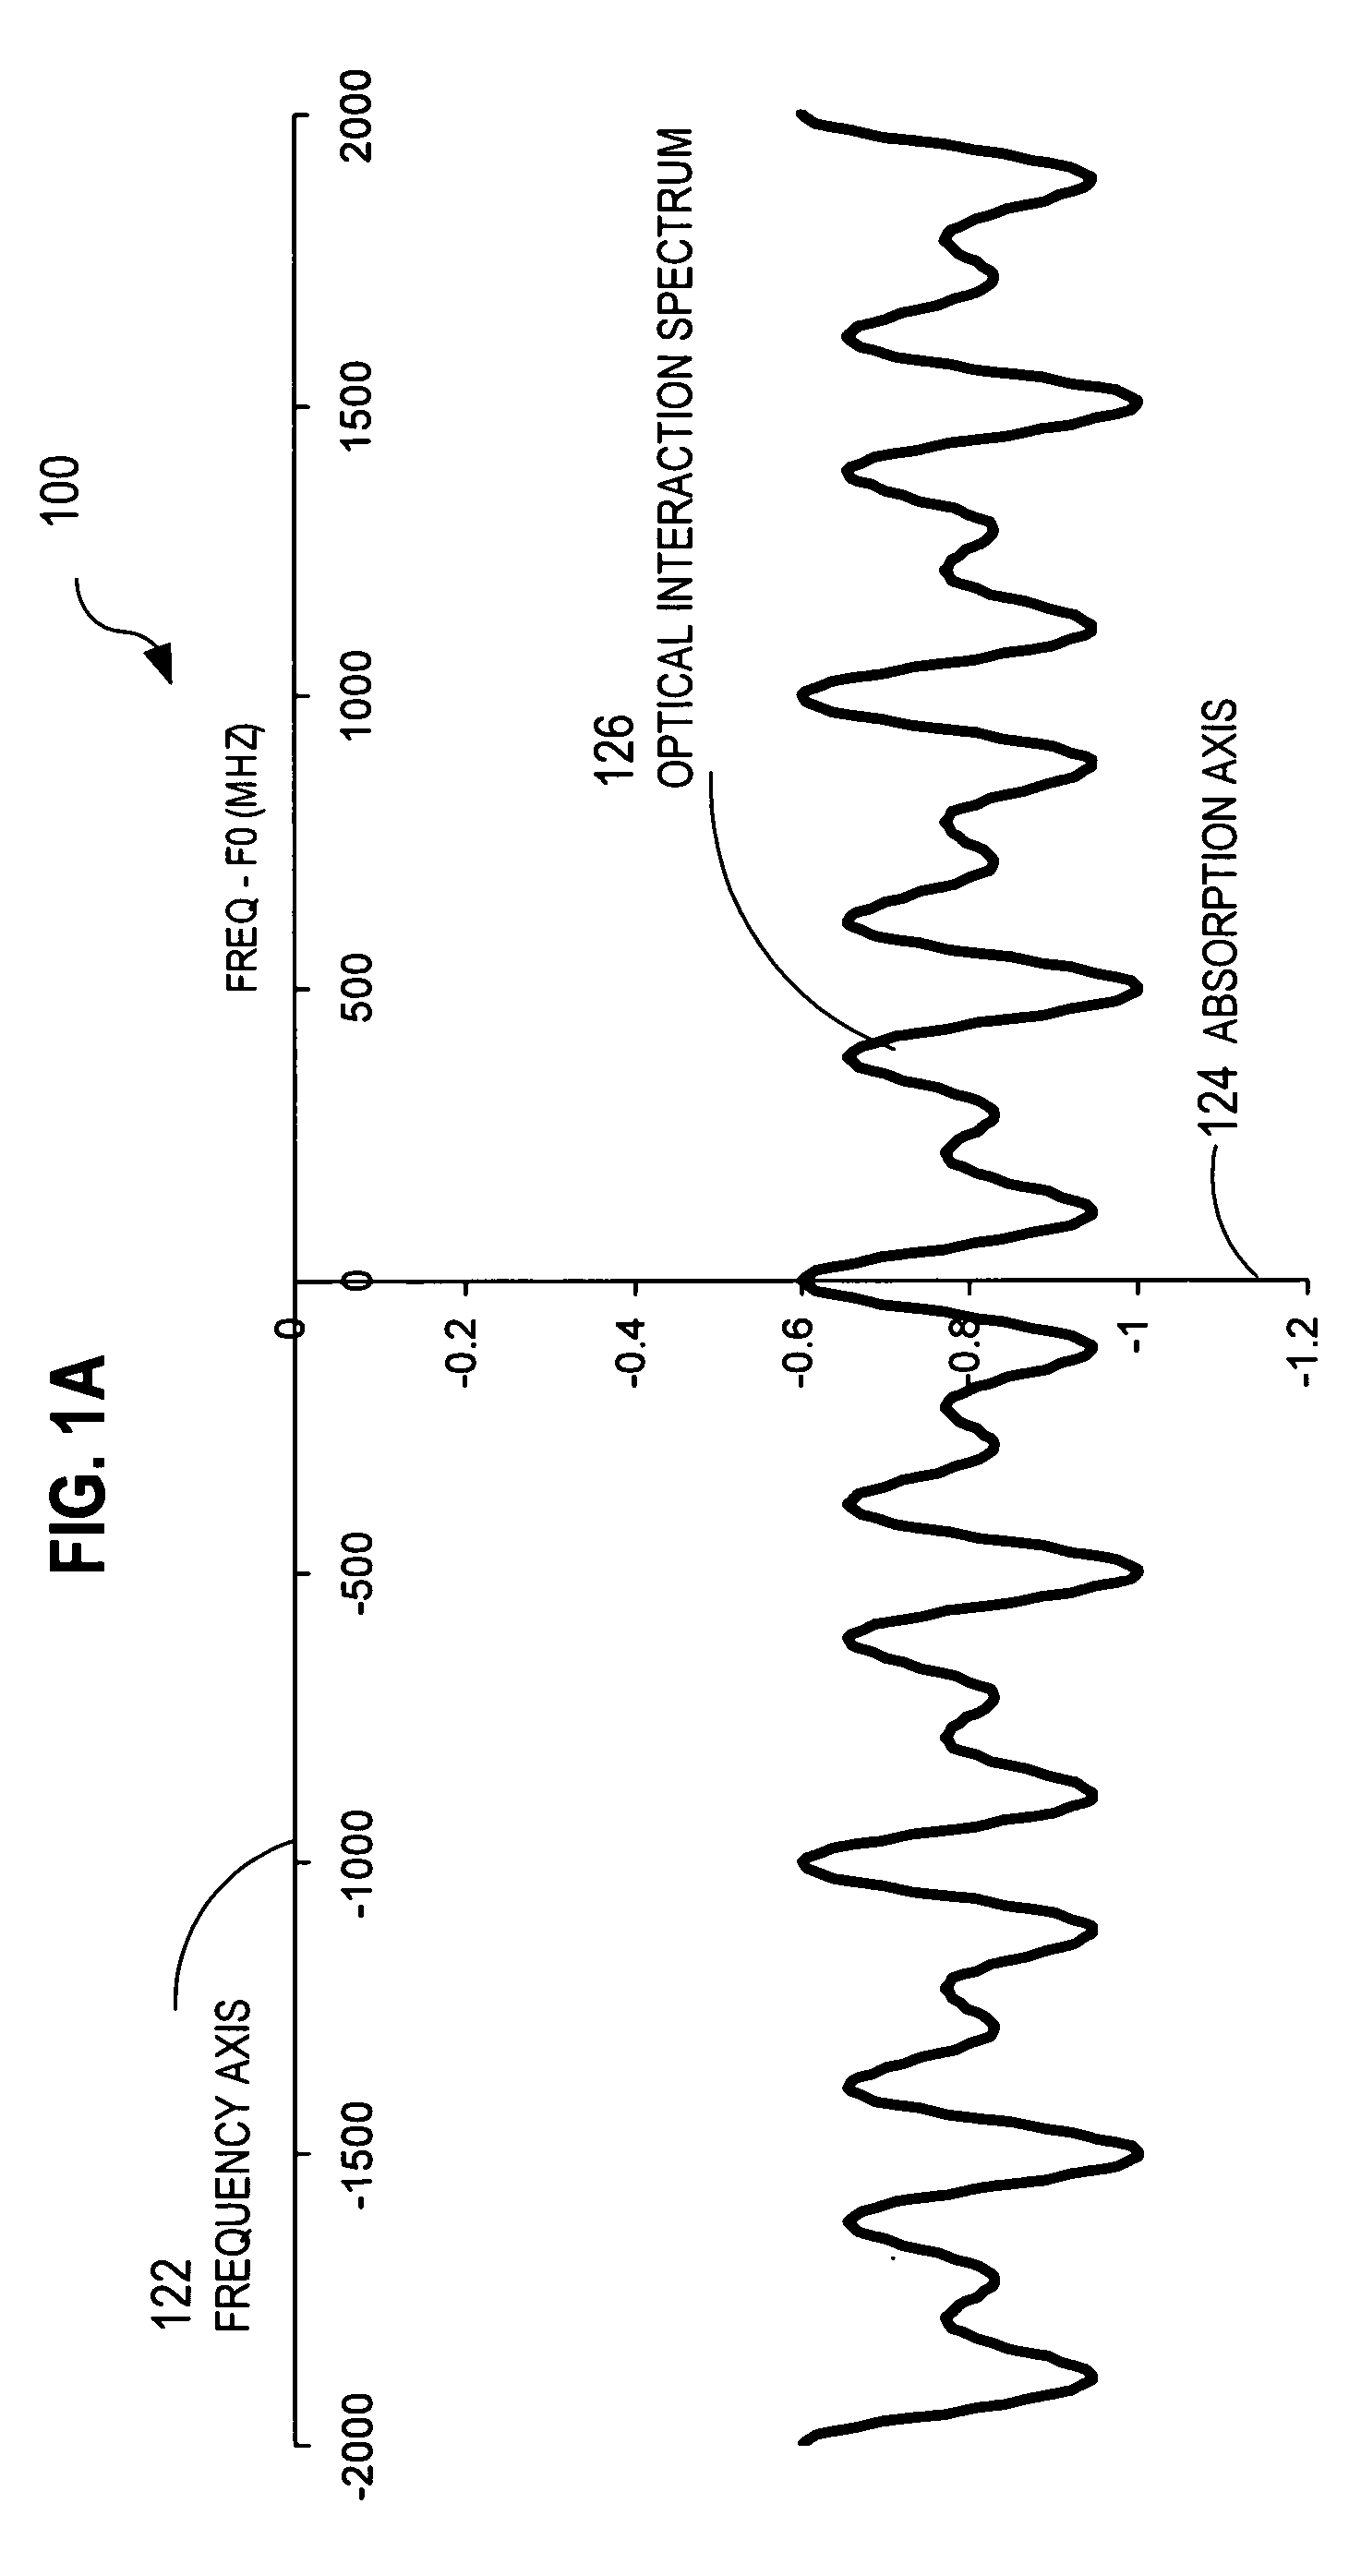 Method and apparatus for detecting optical spectral properties using optical probe beams with multiple sidebands